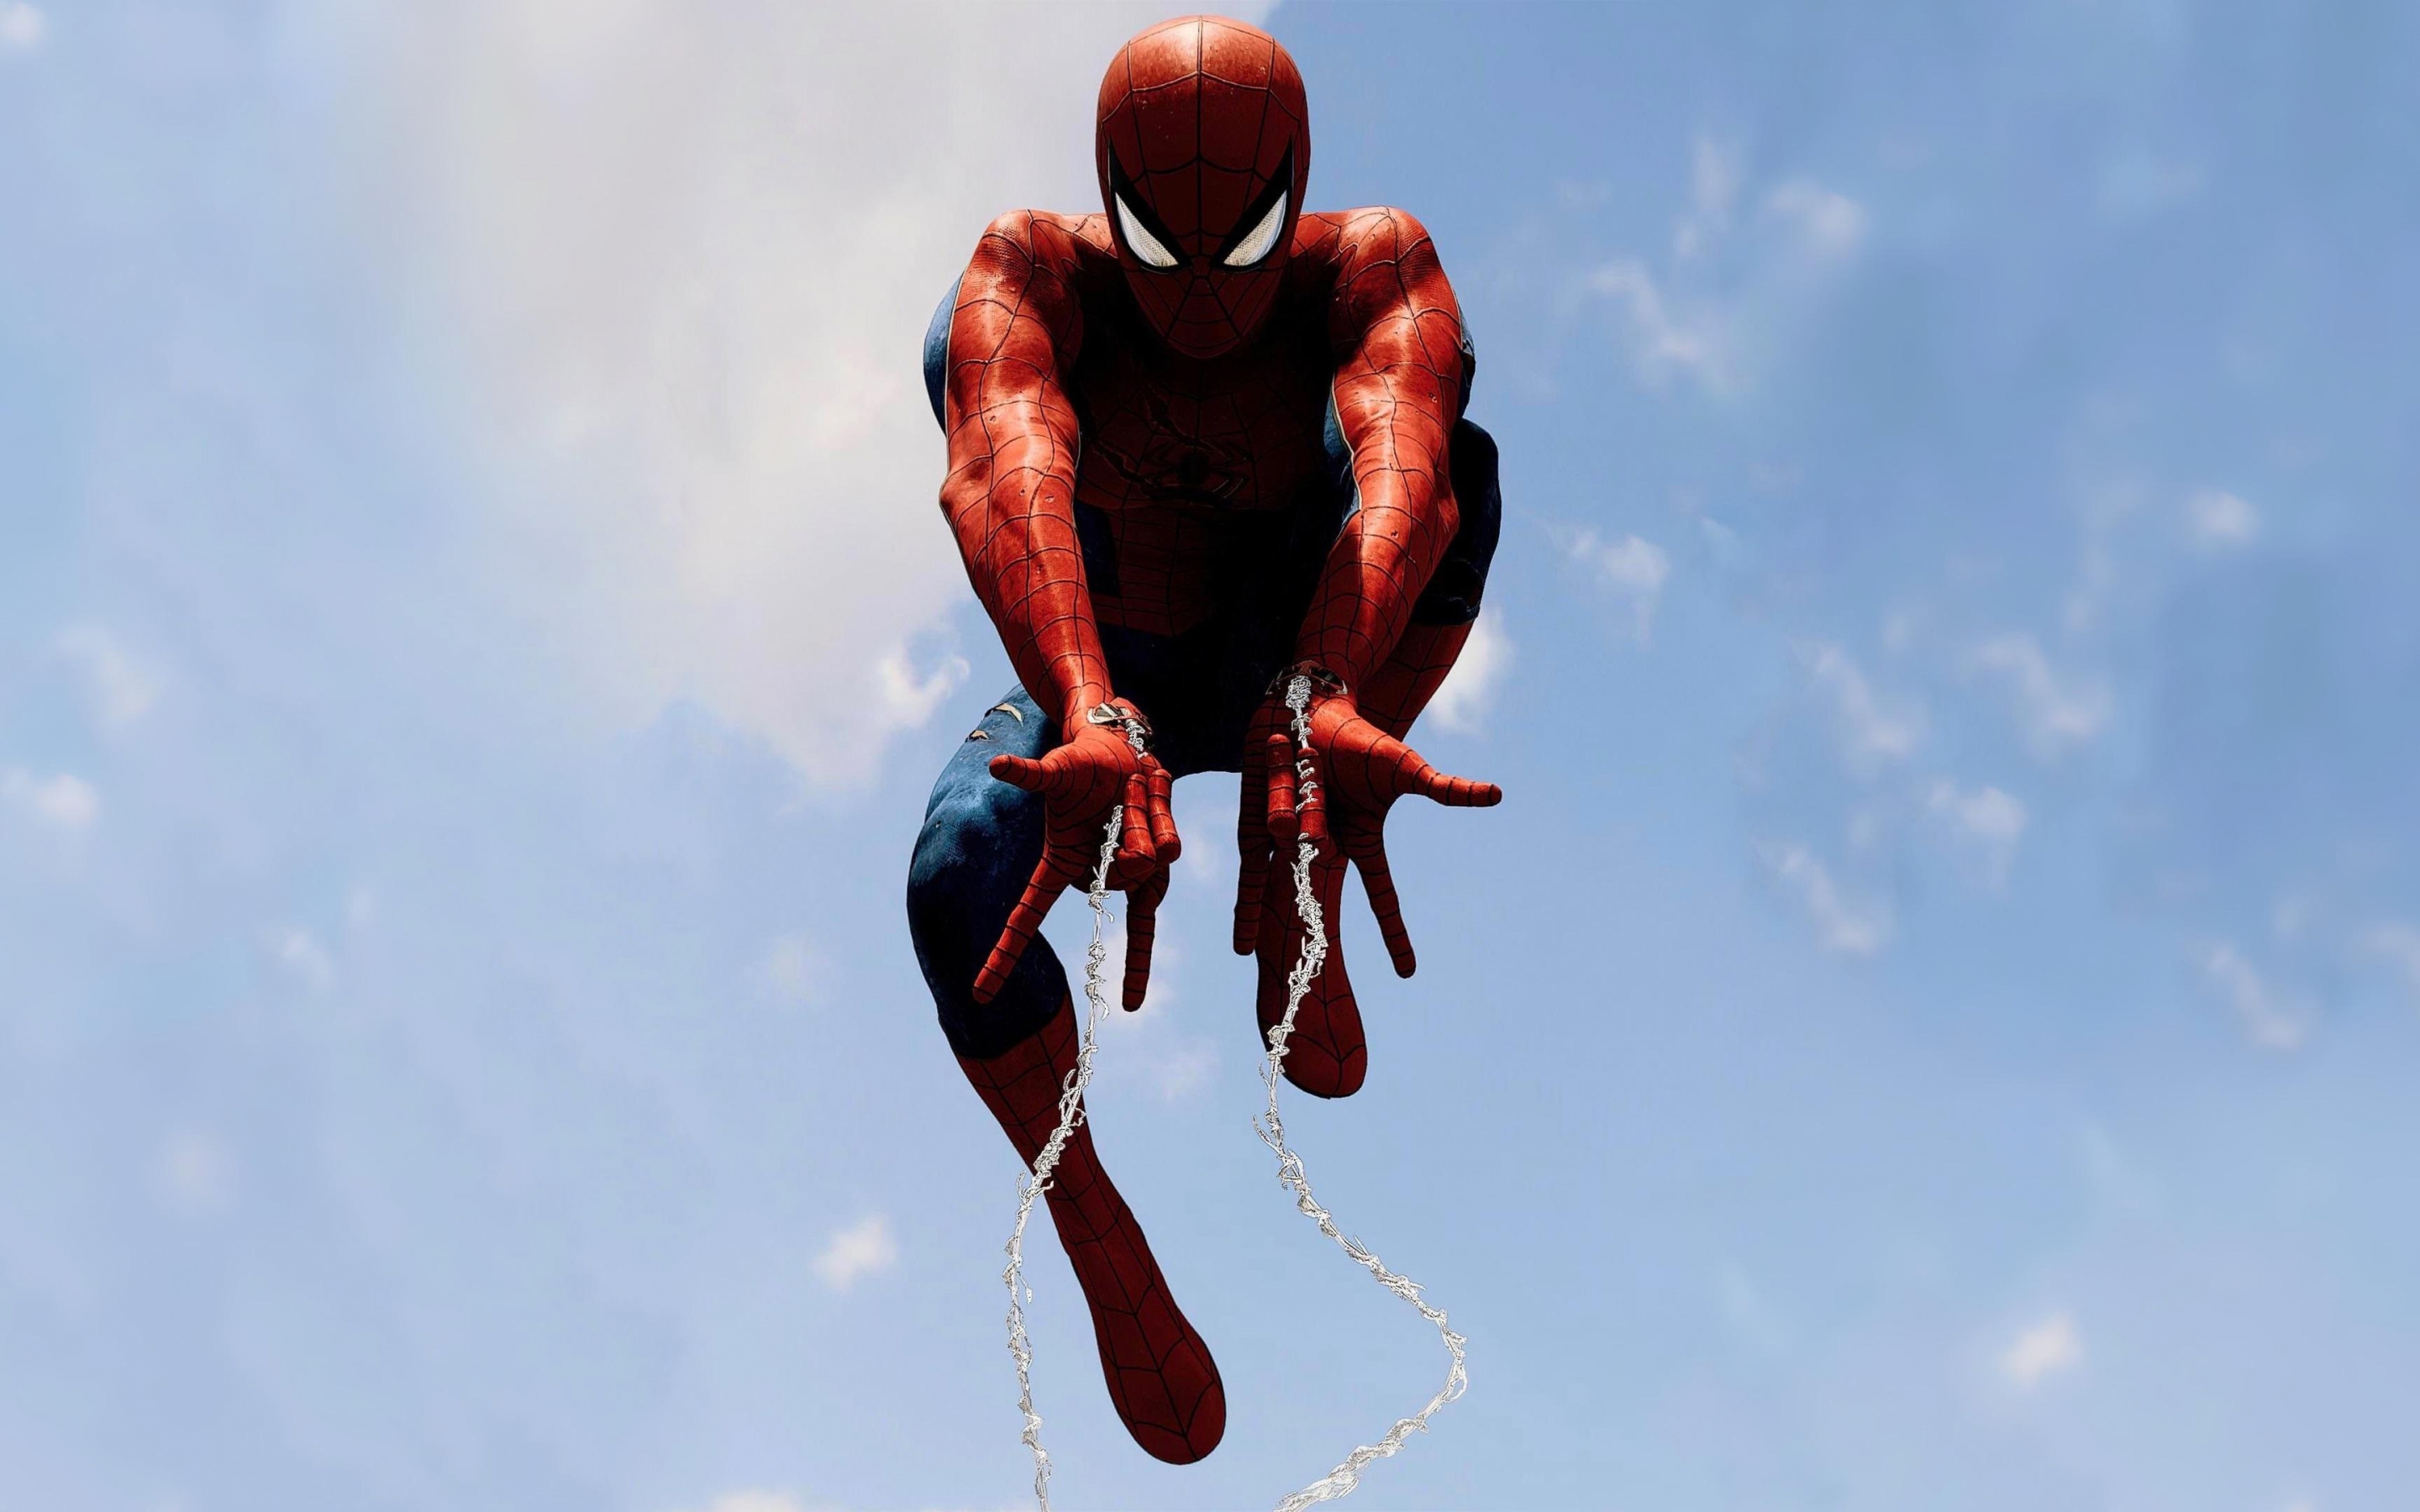 Spider-man, swing, PS4 game, 2880x1800 wallpaper